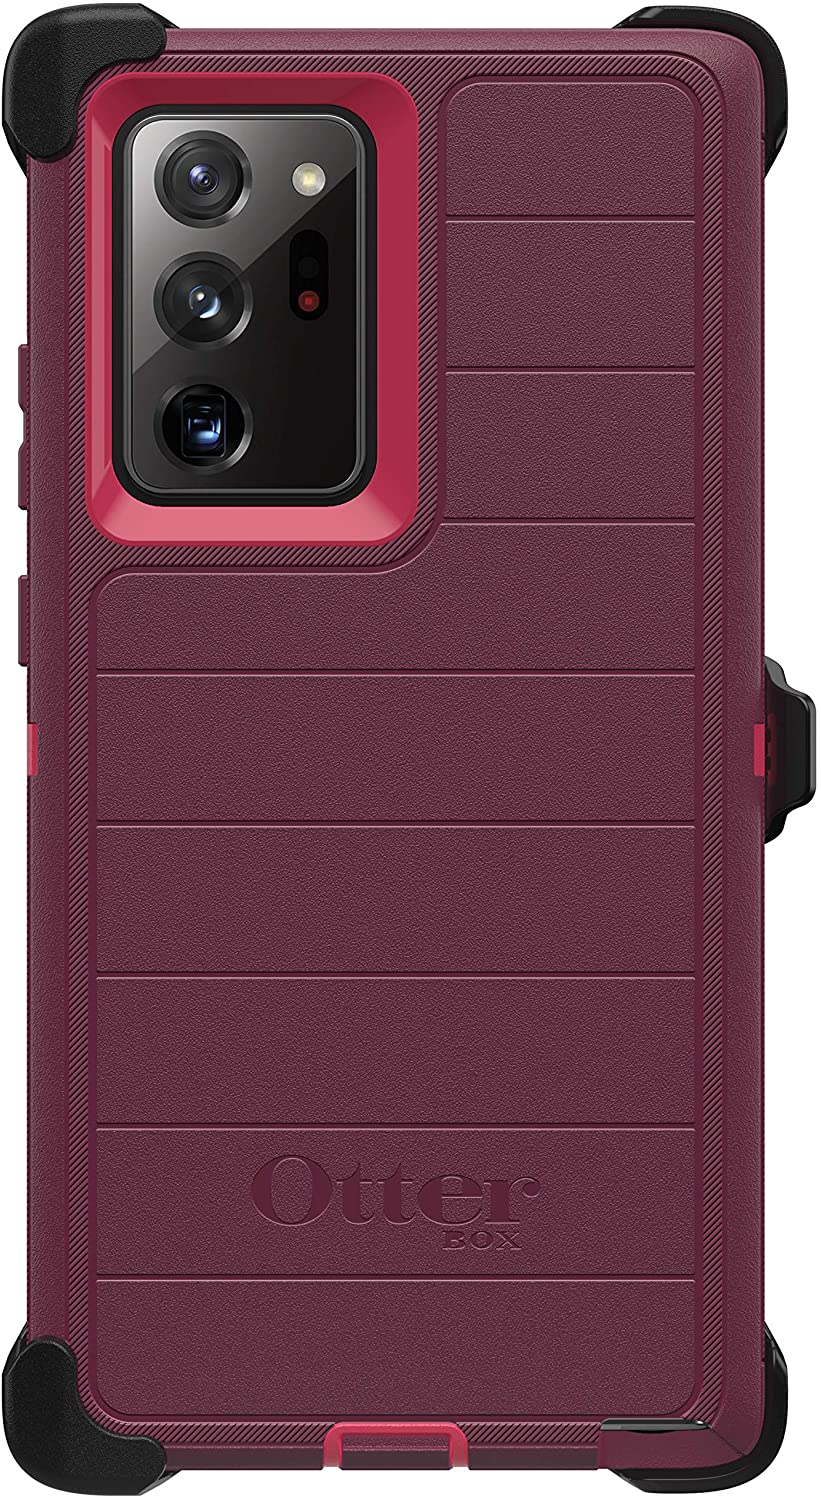 NOTE 20 ULTRA OTTER BOX CASES